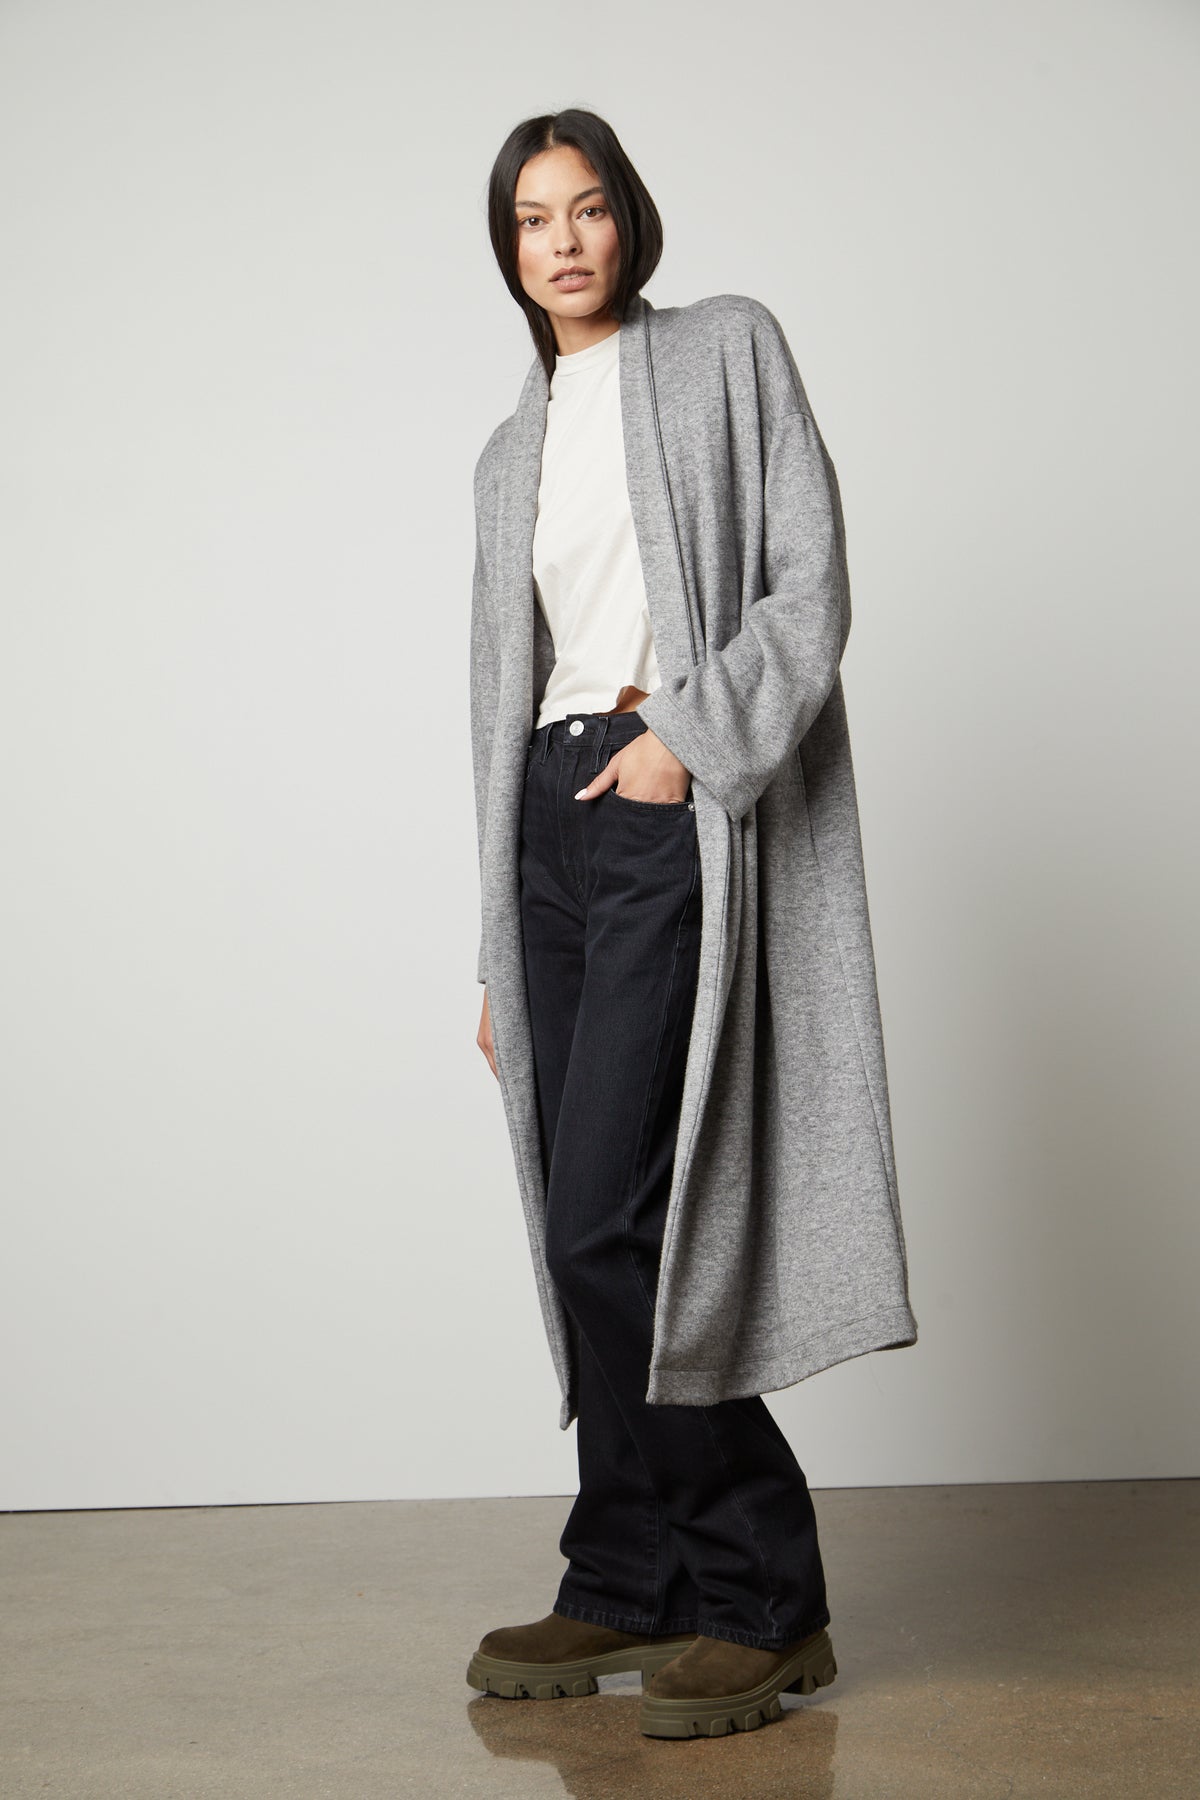   The model is wearing a Velvet by Graham & Spencer PATRICIA DOUBLE KNIT DUSTER CARDIGAN and jeans. 